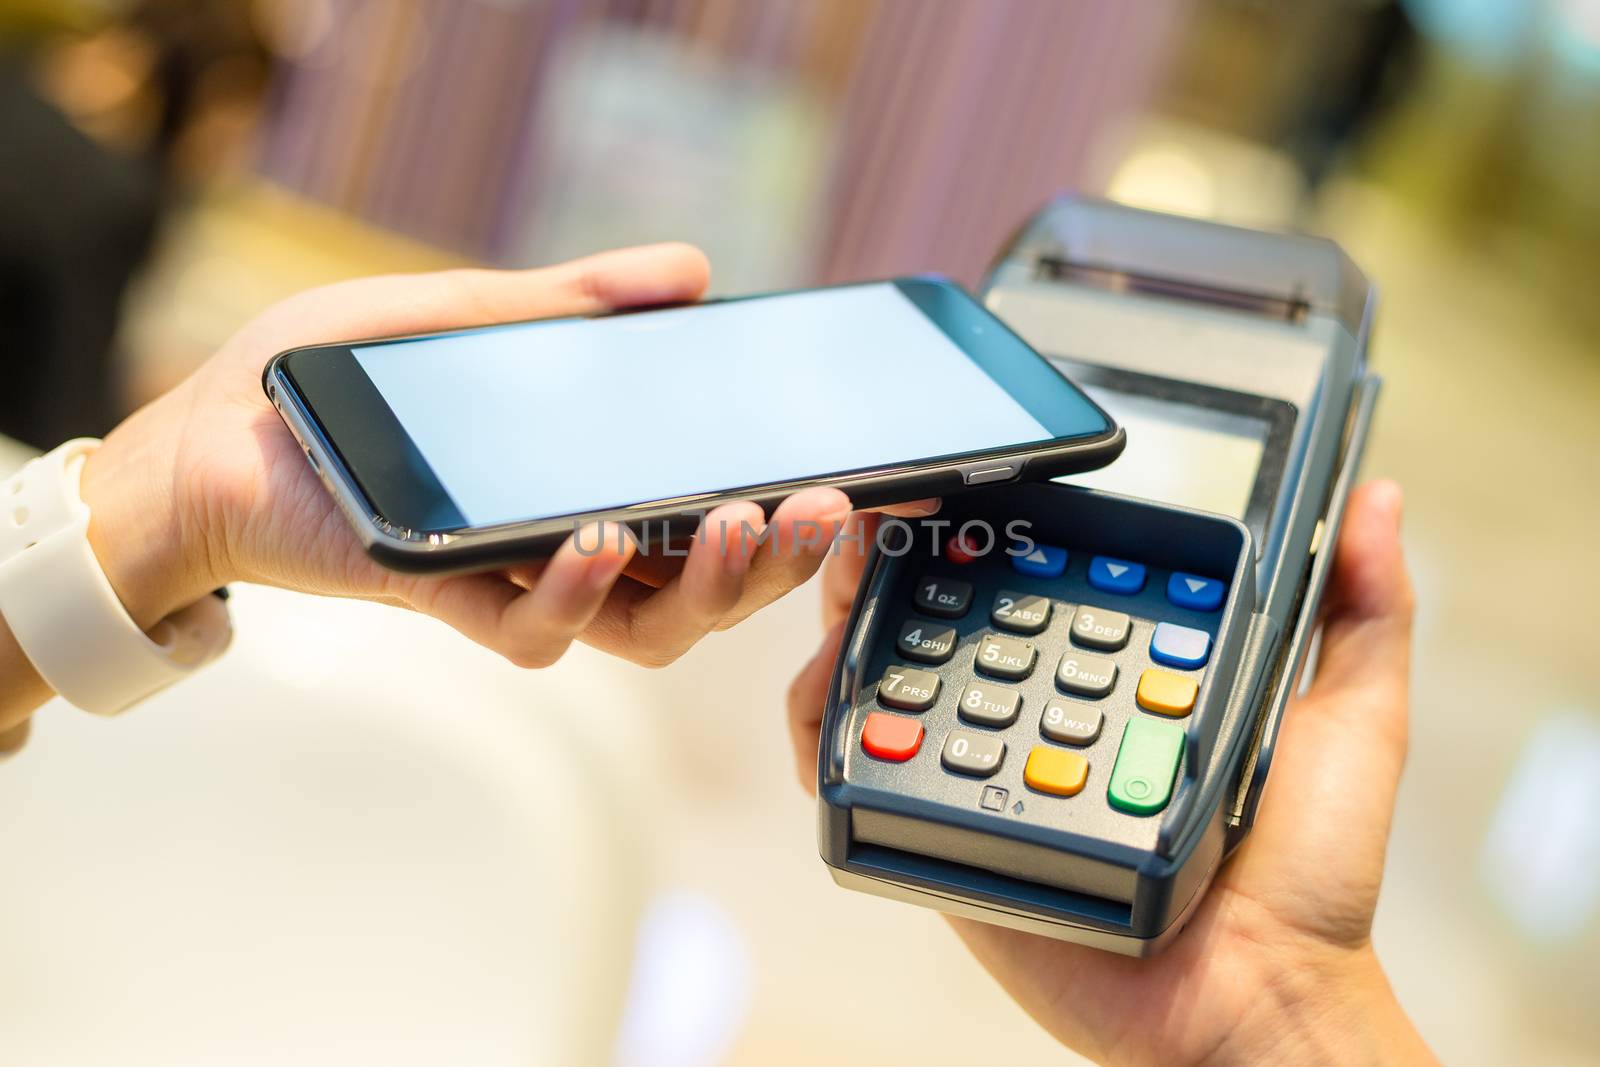 Mobile phone pay with NFC technology